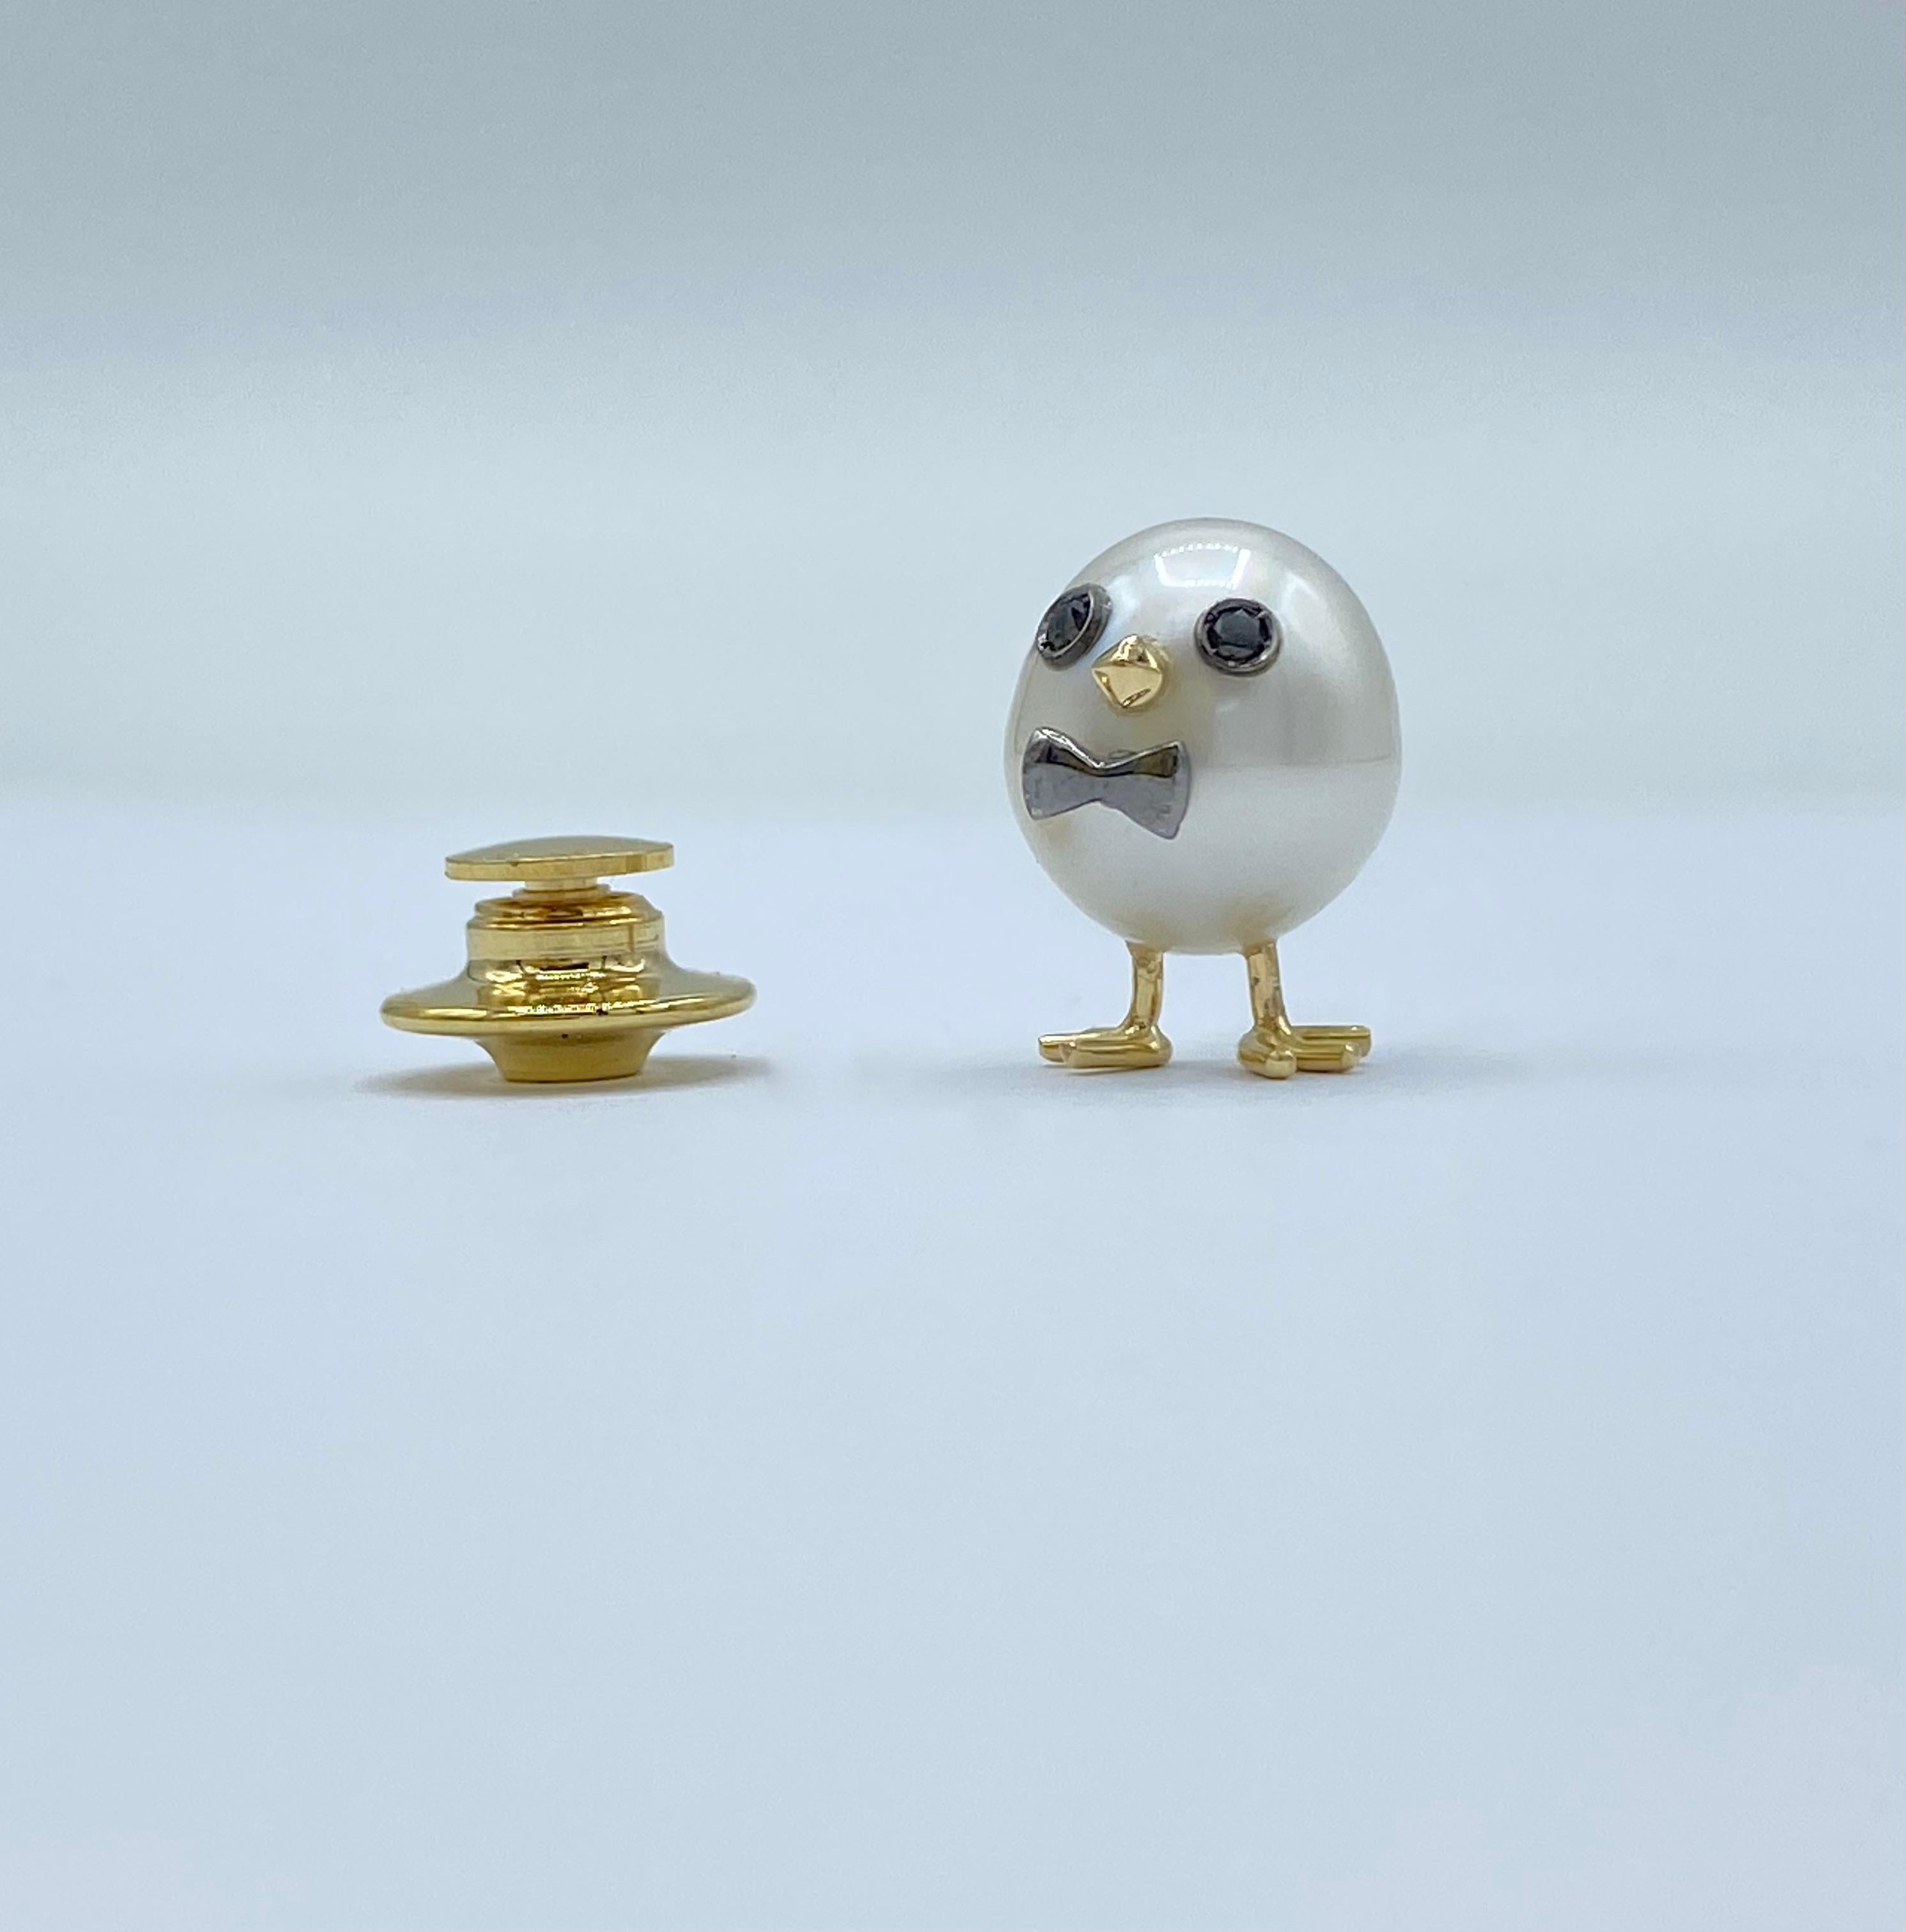 Petronilla Chick White and Red Yellow 18 Karat Gold Australian Pearl Pin
A small beautiful Australian pearl has been carefully crafted to make a chick with a black papillon.
It's a nice jacket brooch, suitable for both men and women.
The eyes are